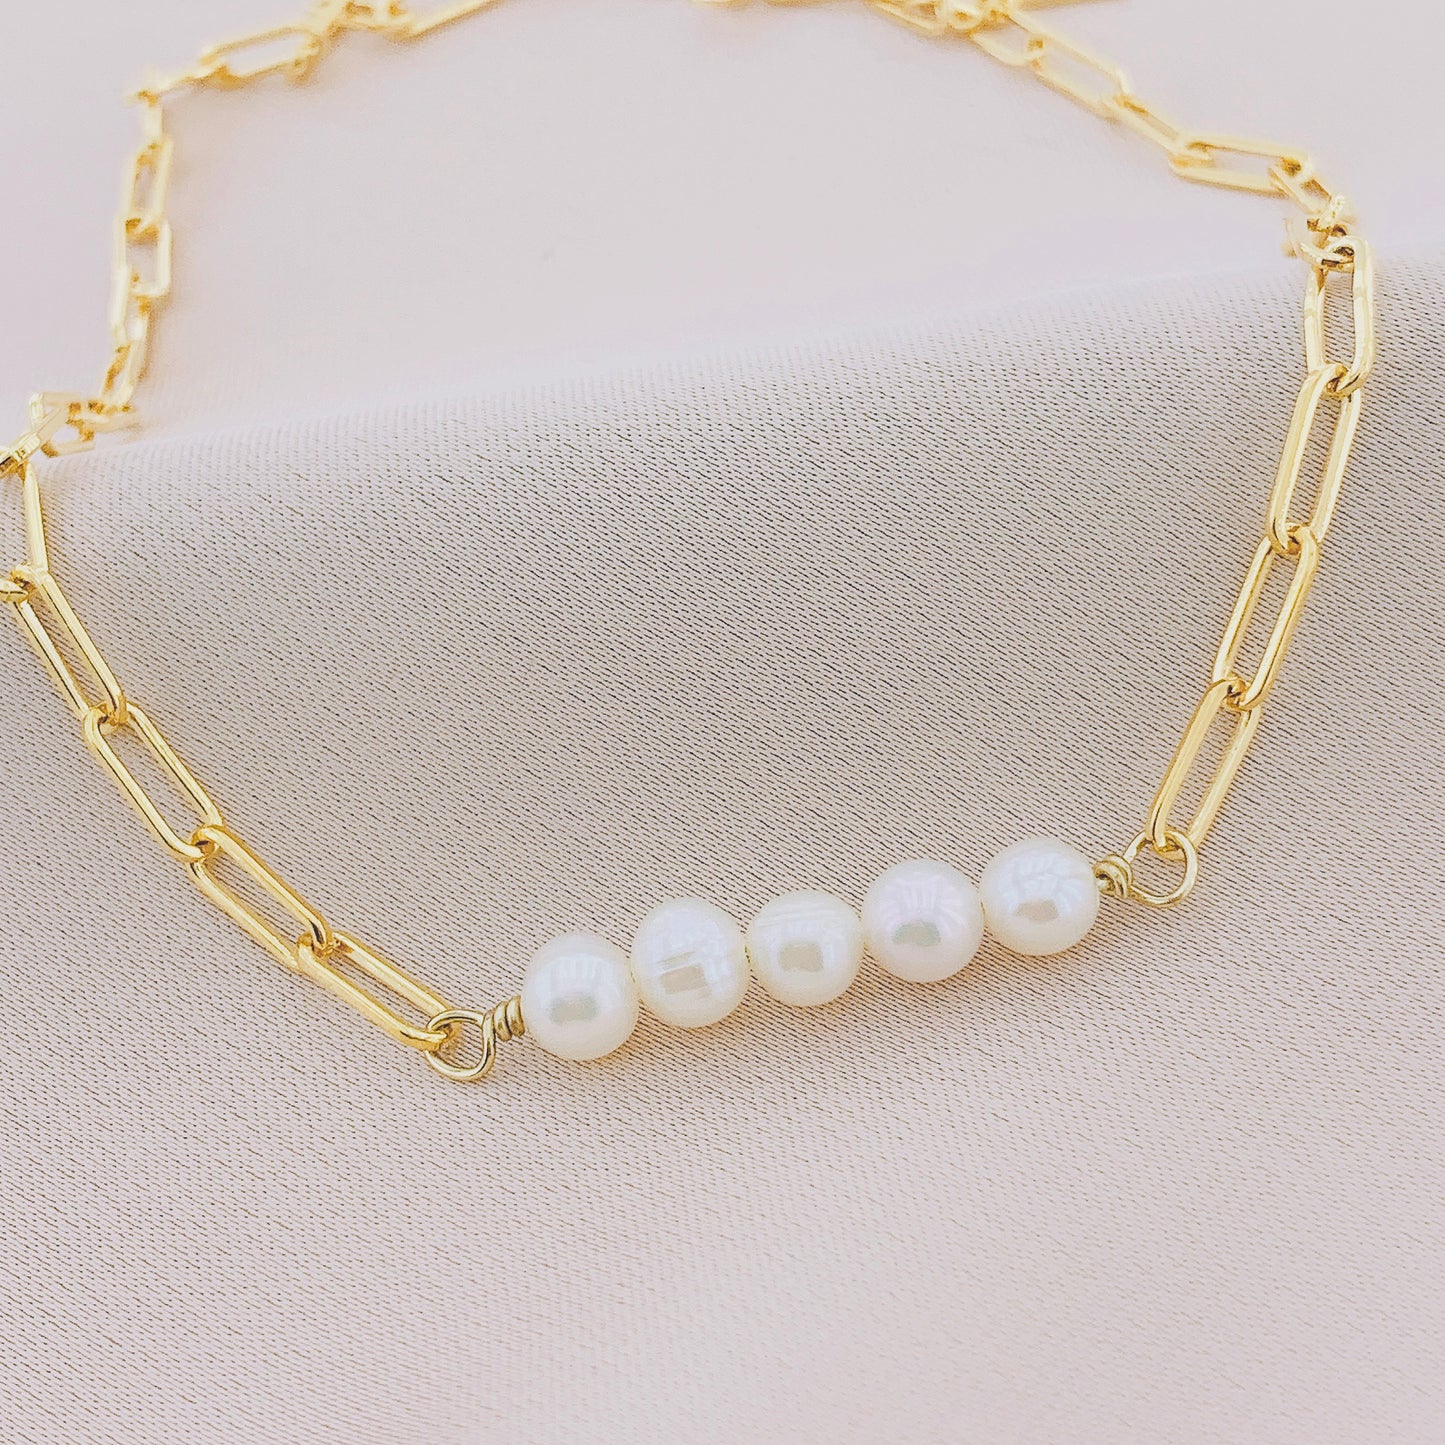 Women's Fashion Pearl Necklace